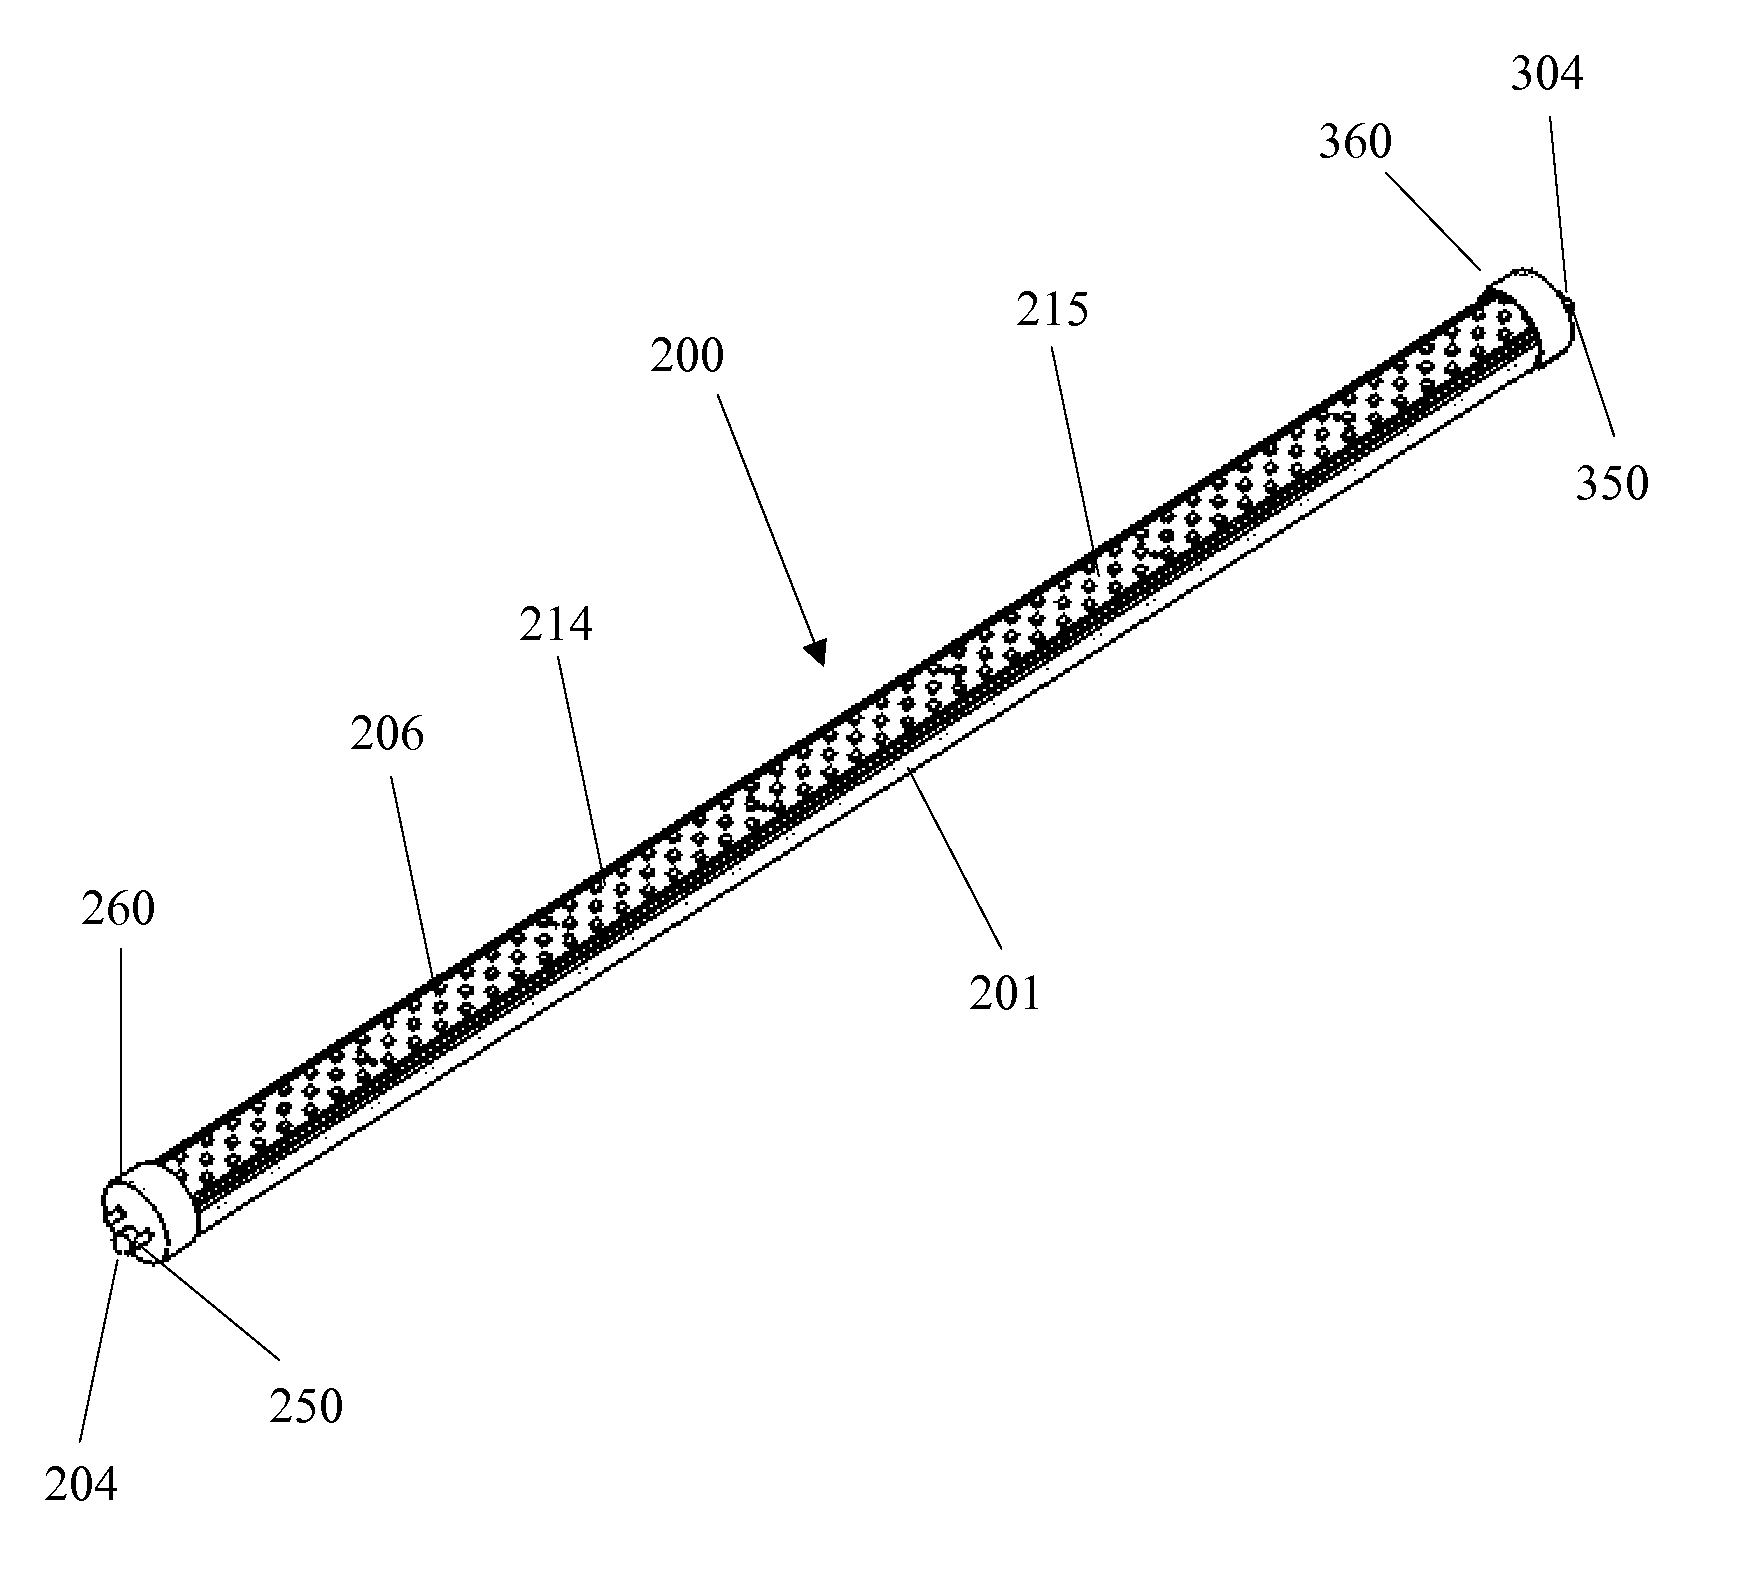 Linear solid-state lighting with a double safety mechanism free of shock hazard